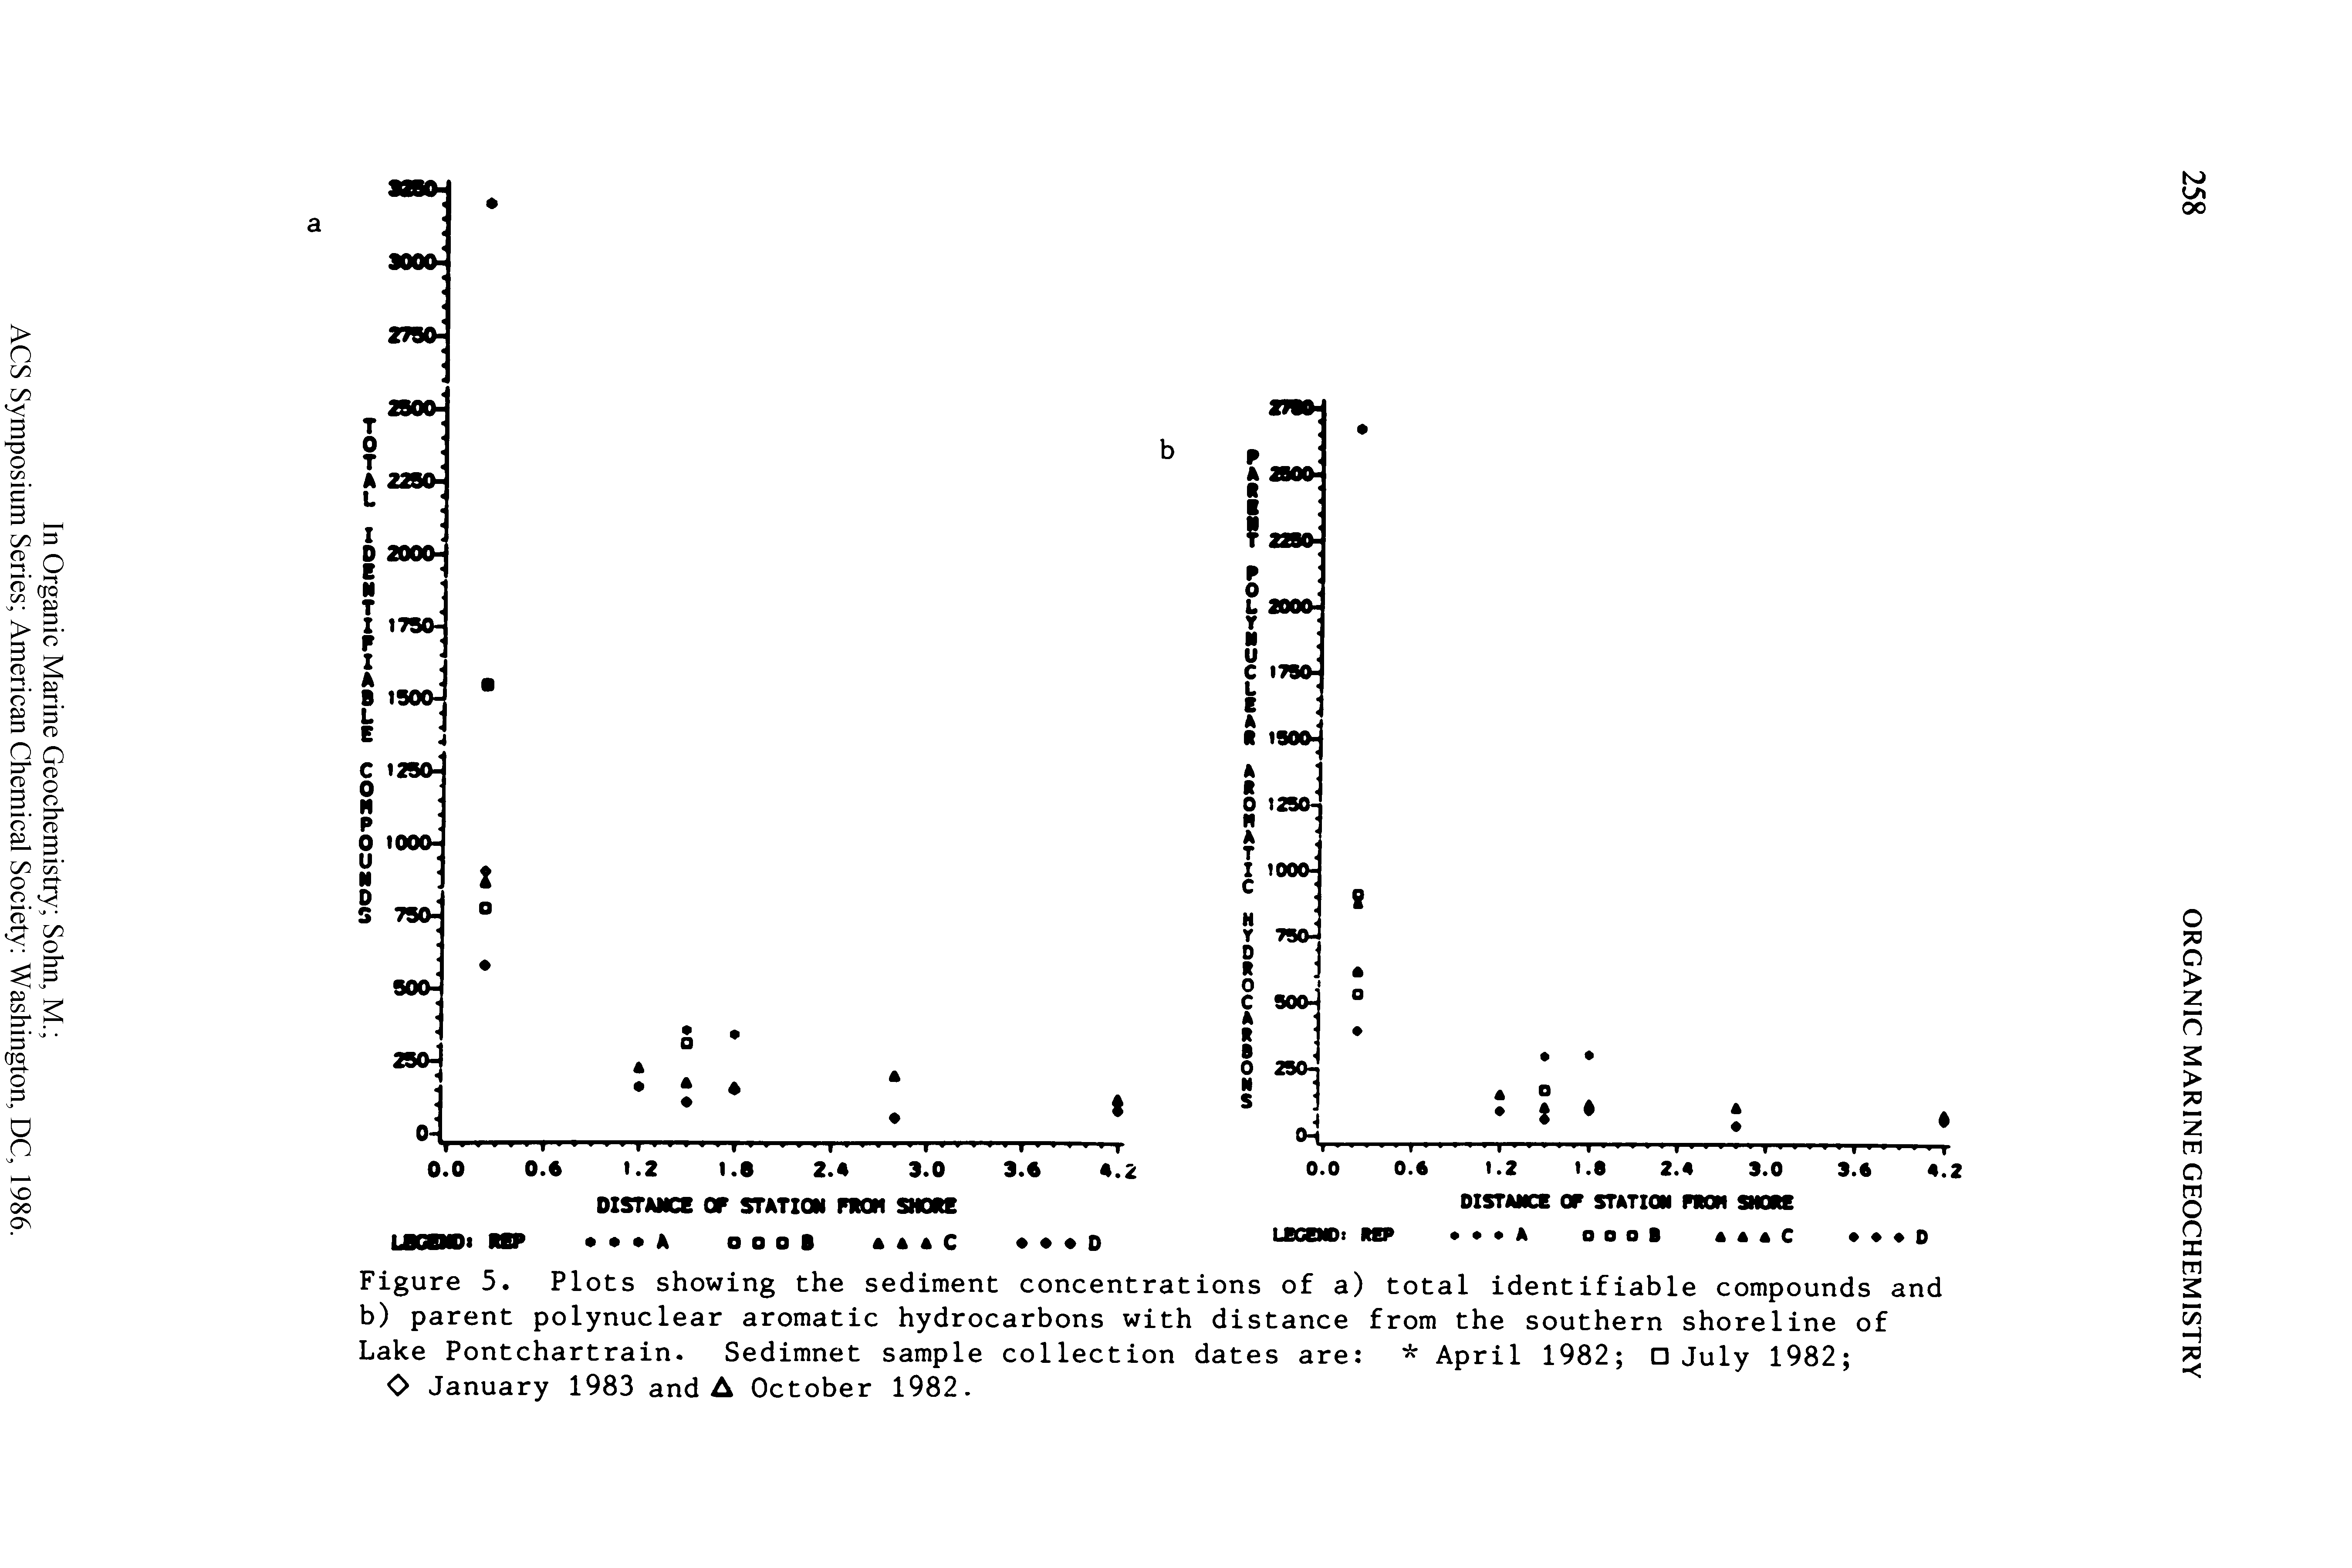 Figure 5. Plots showing the sediment concentrations of a) total identifiable compounds and b) parent polynuclear aromatic hydrocarbons with distance from the southern shoreline of Lake Pontchartrain. Sedimnet sample collection dates are April 1982 July 1982 ...